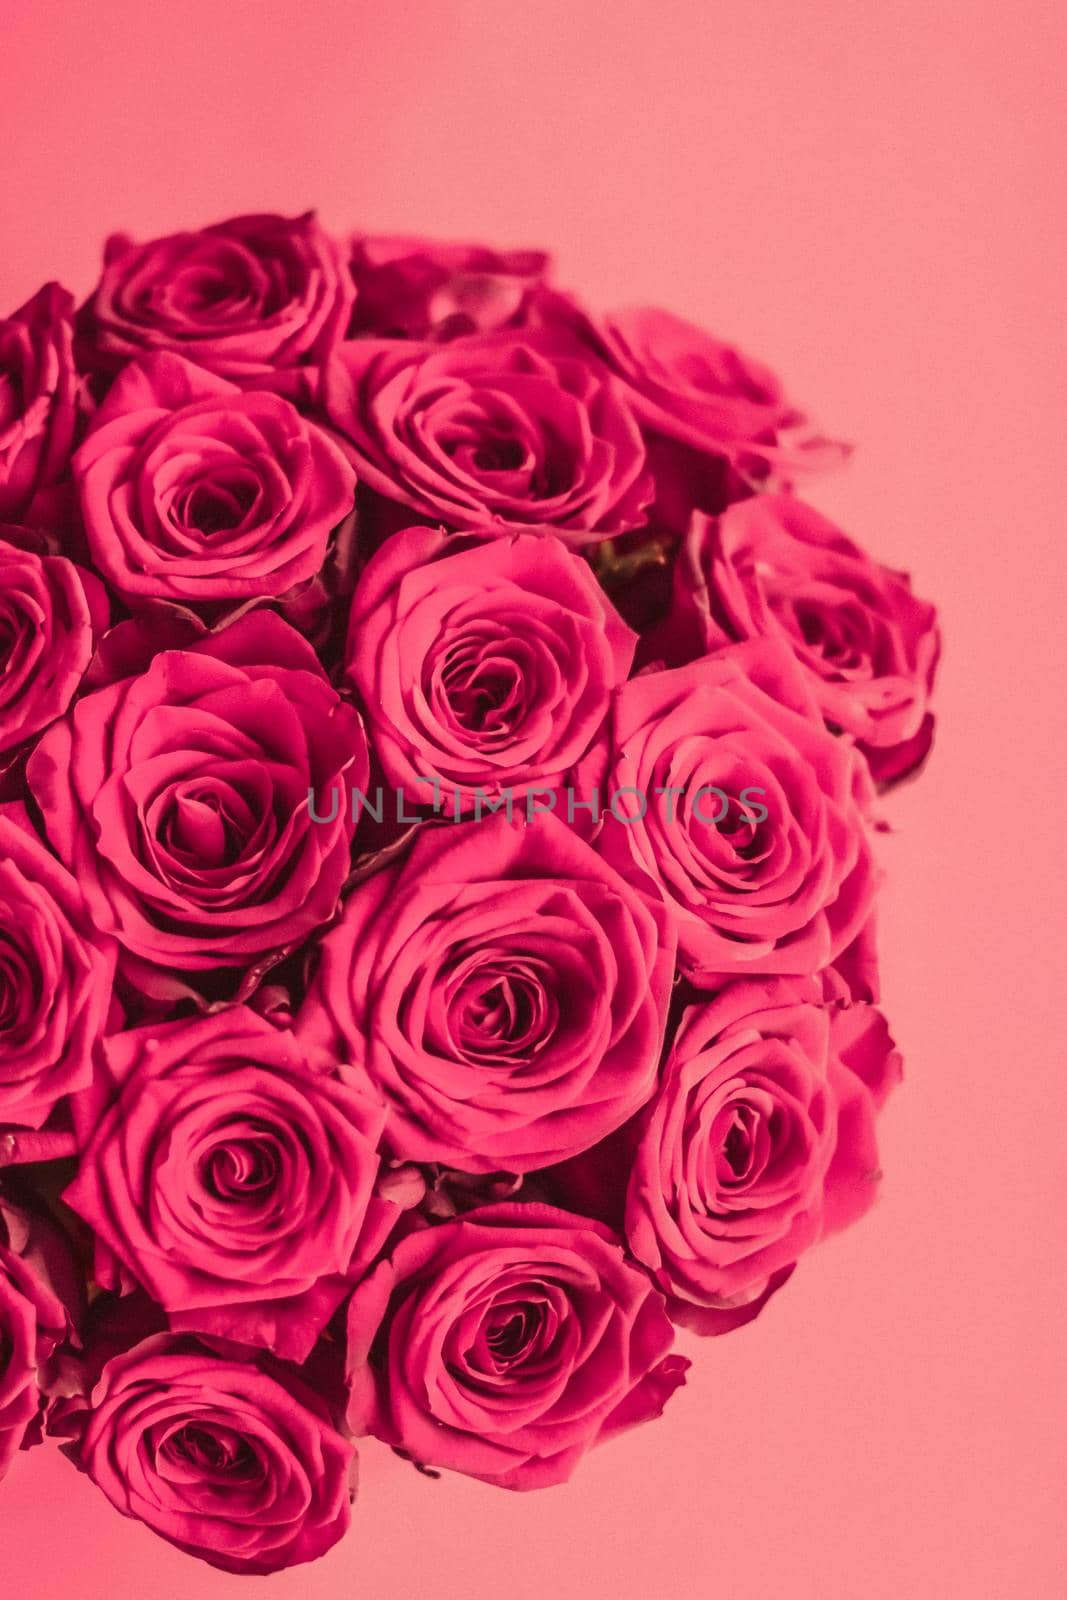 Blooming rose, flower blossom and Valentines Day gift concept - Romantic luxury bouquet of pink roses, flowers in bloom as floral holiday background